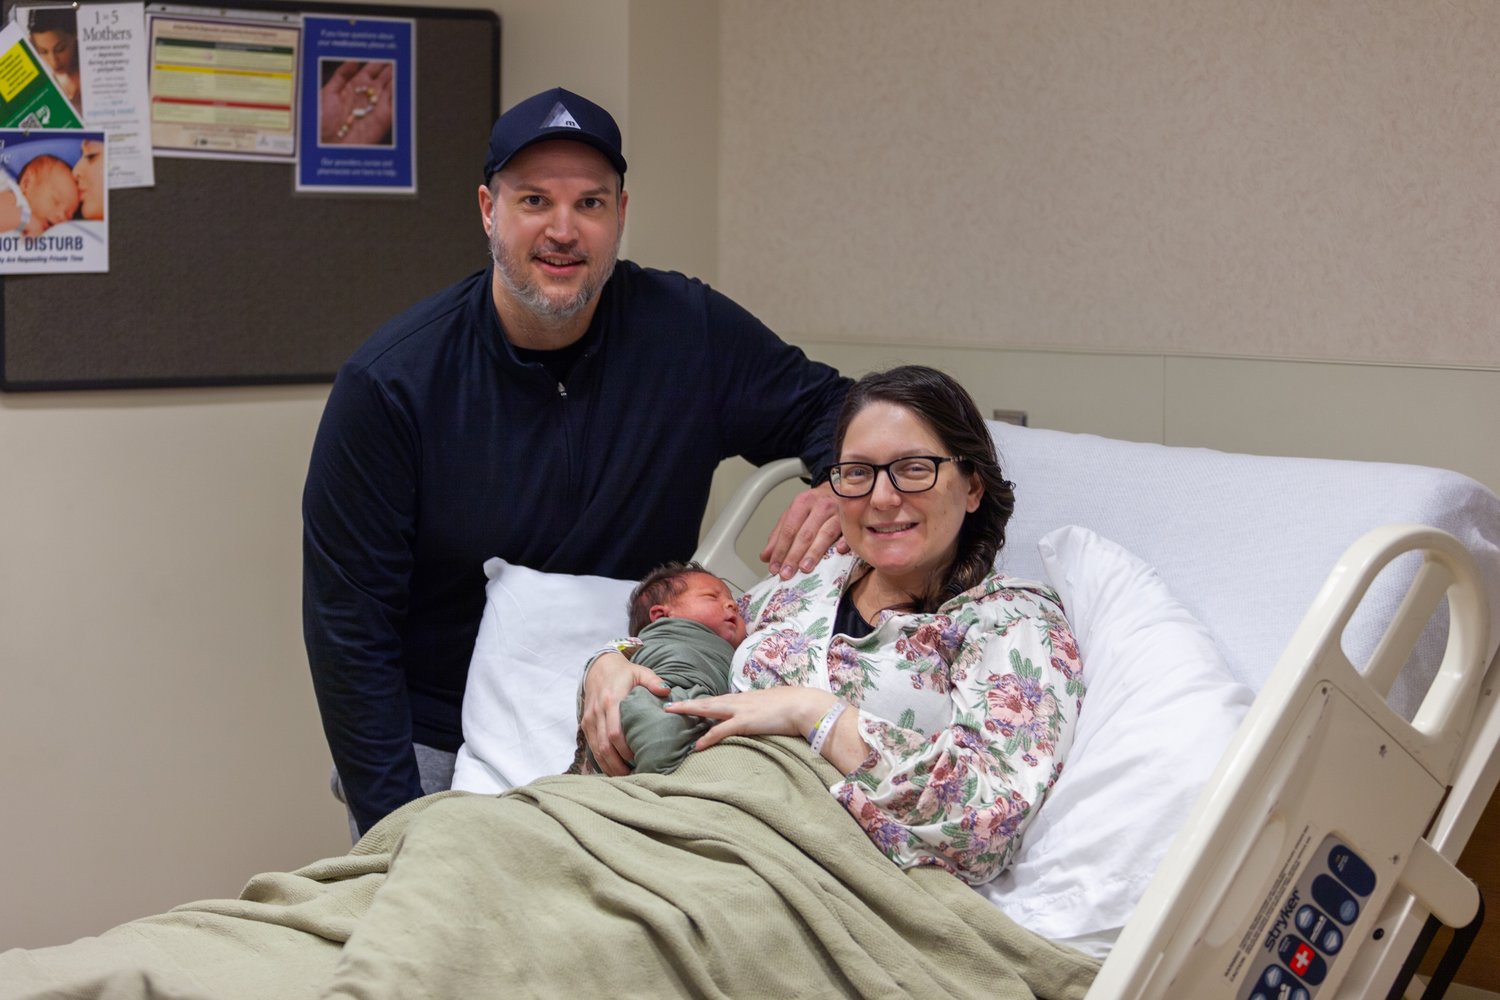 Danielle Mullen (right) and Colin Pezdek (left), from Whitesboro, are the parents of Barrett Jeffrey Pezdek, the first baby of the New Year born in Madison County at Oneida Health Hospital.